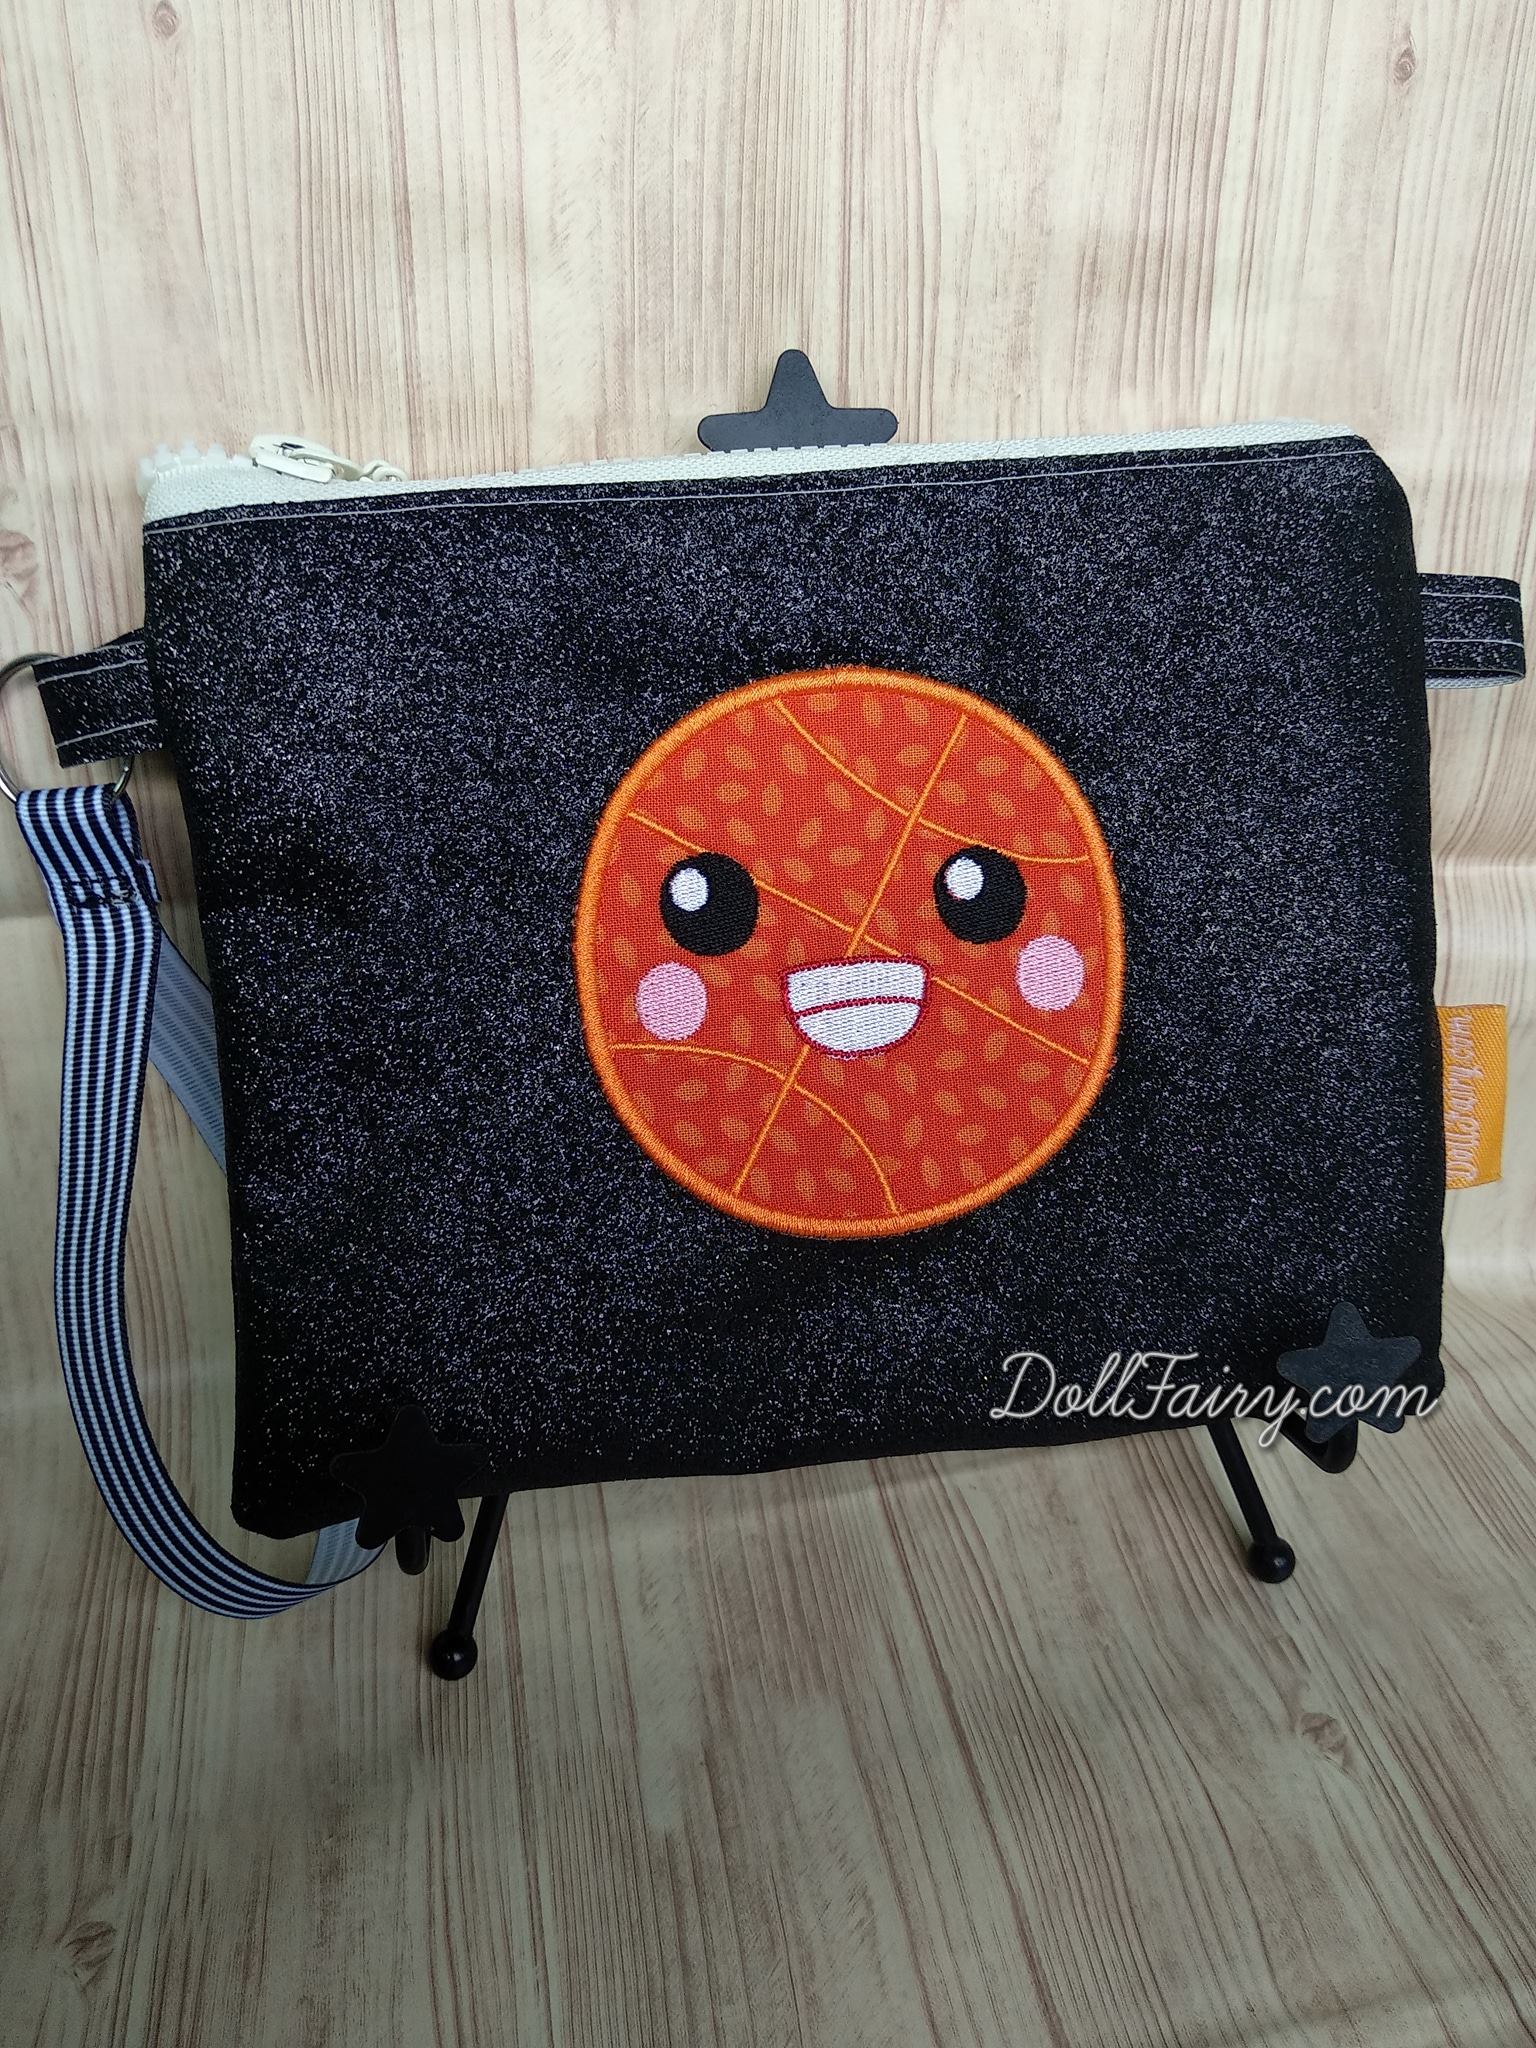 A smiley basketball on a black glitter pouch.